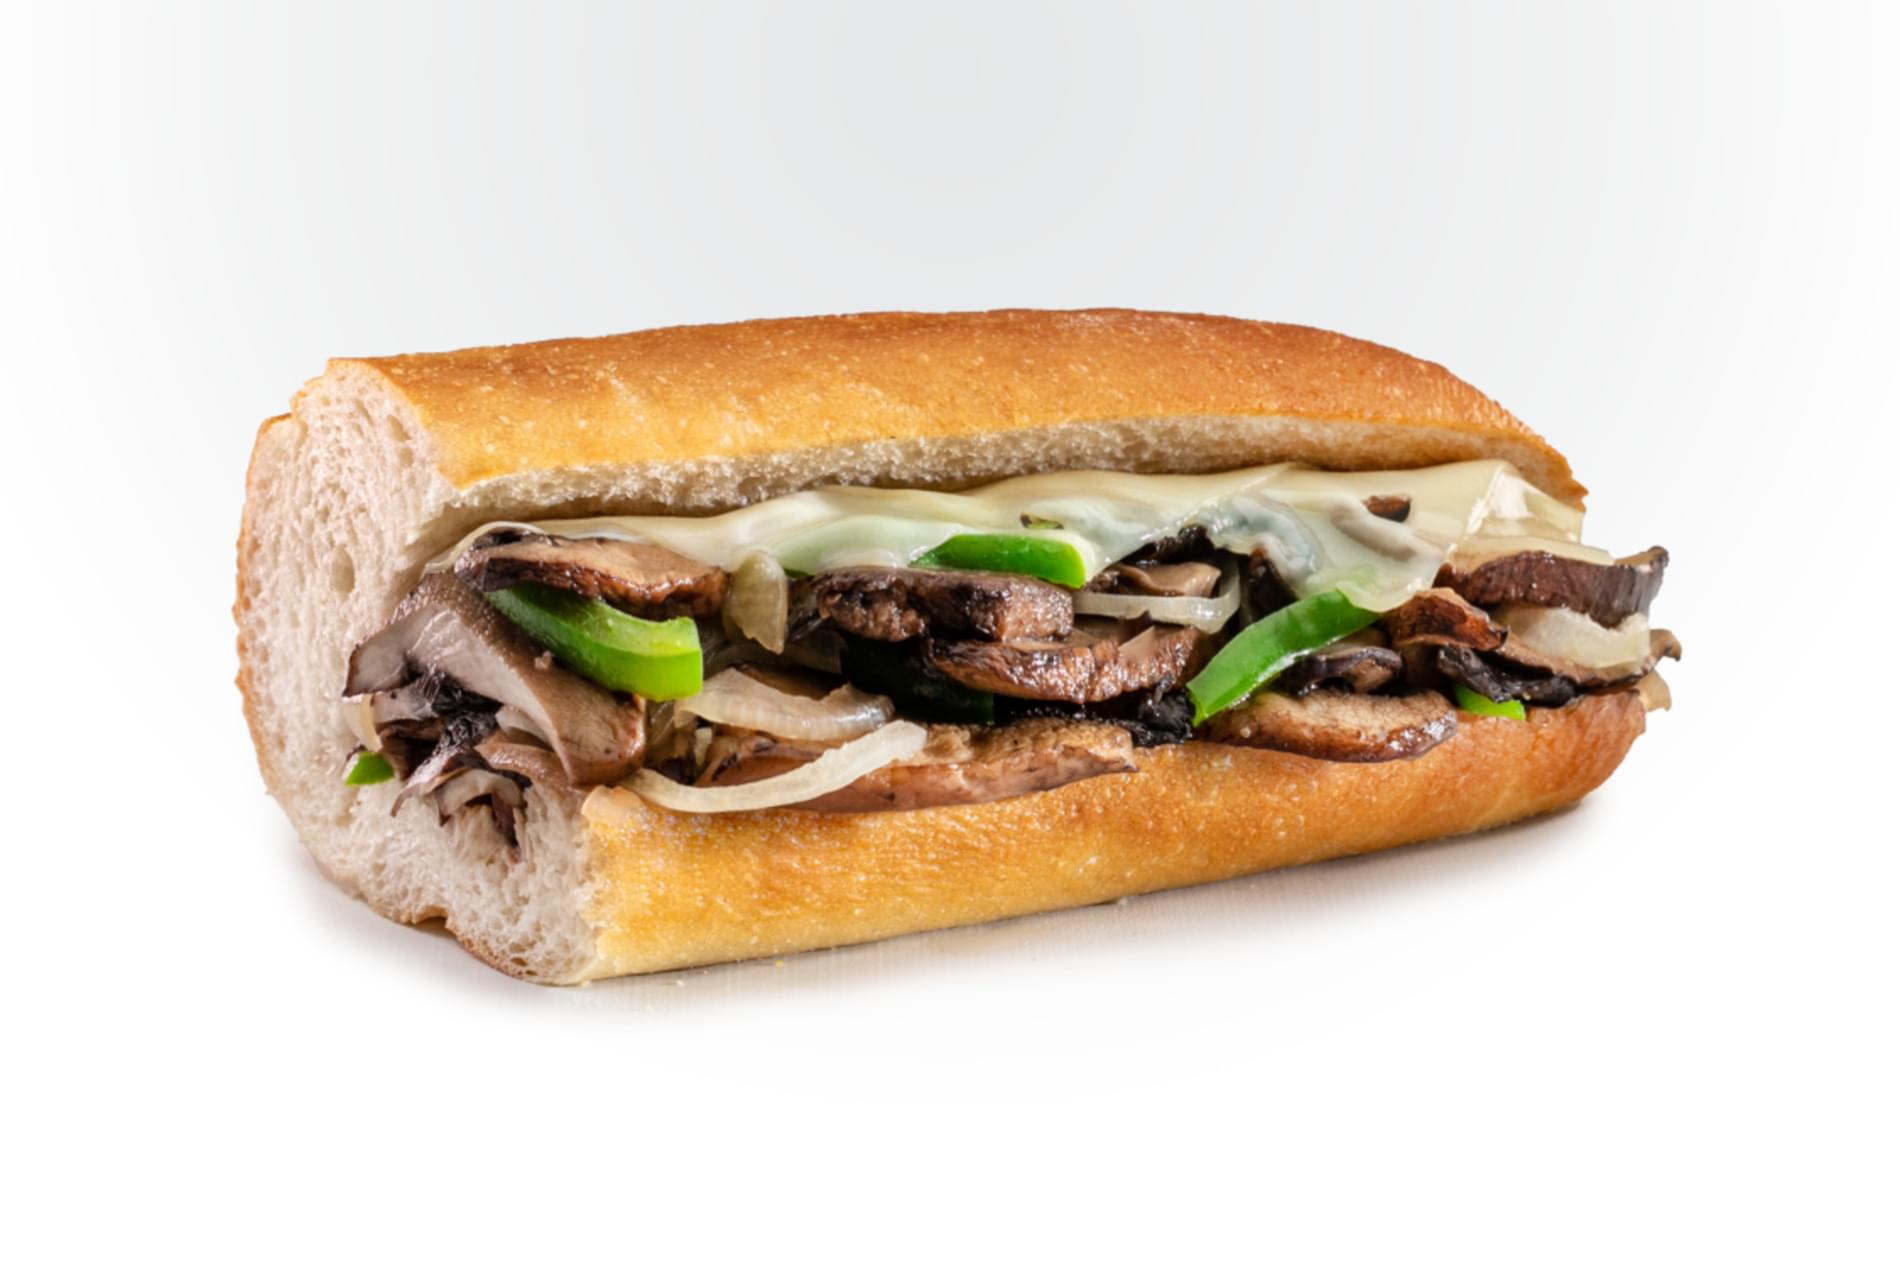 Jersey Mike's Regular Grilled Portabella Mushroom & Swiss Nutrition Facts